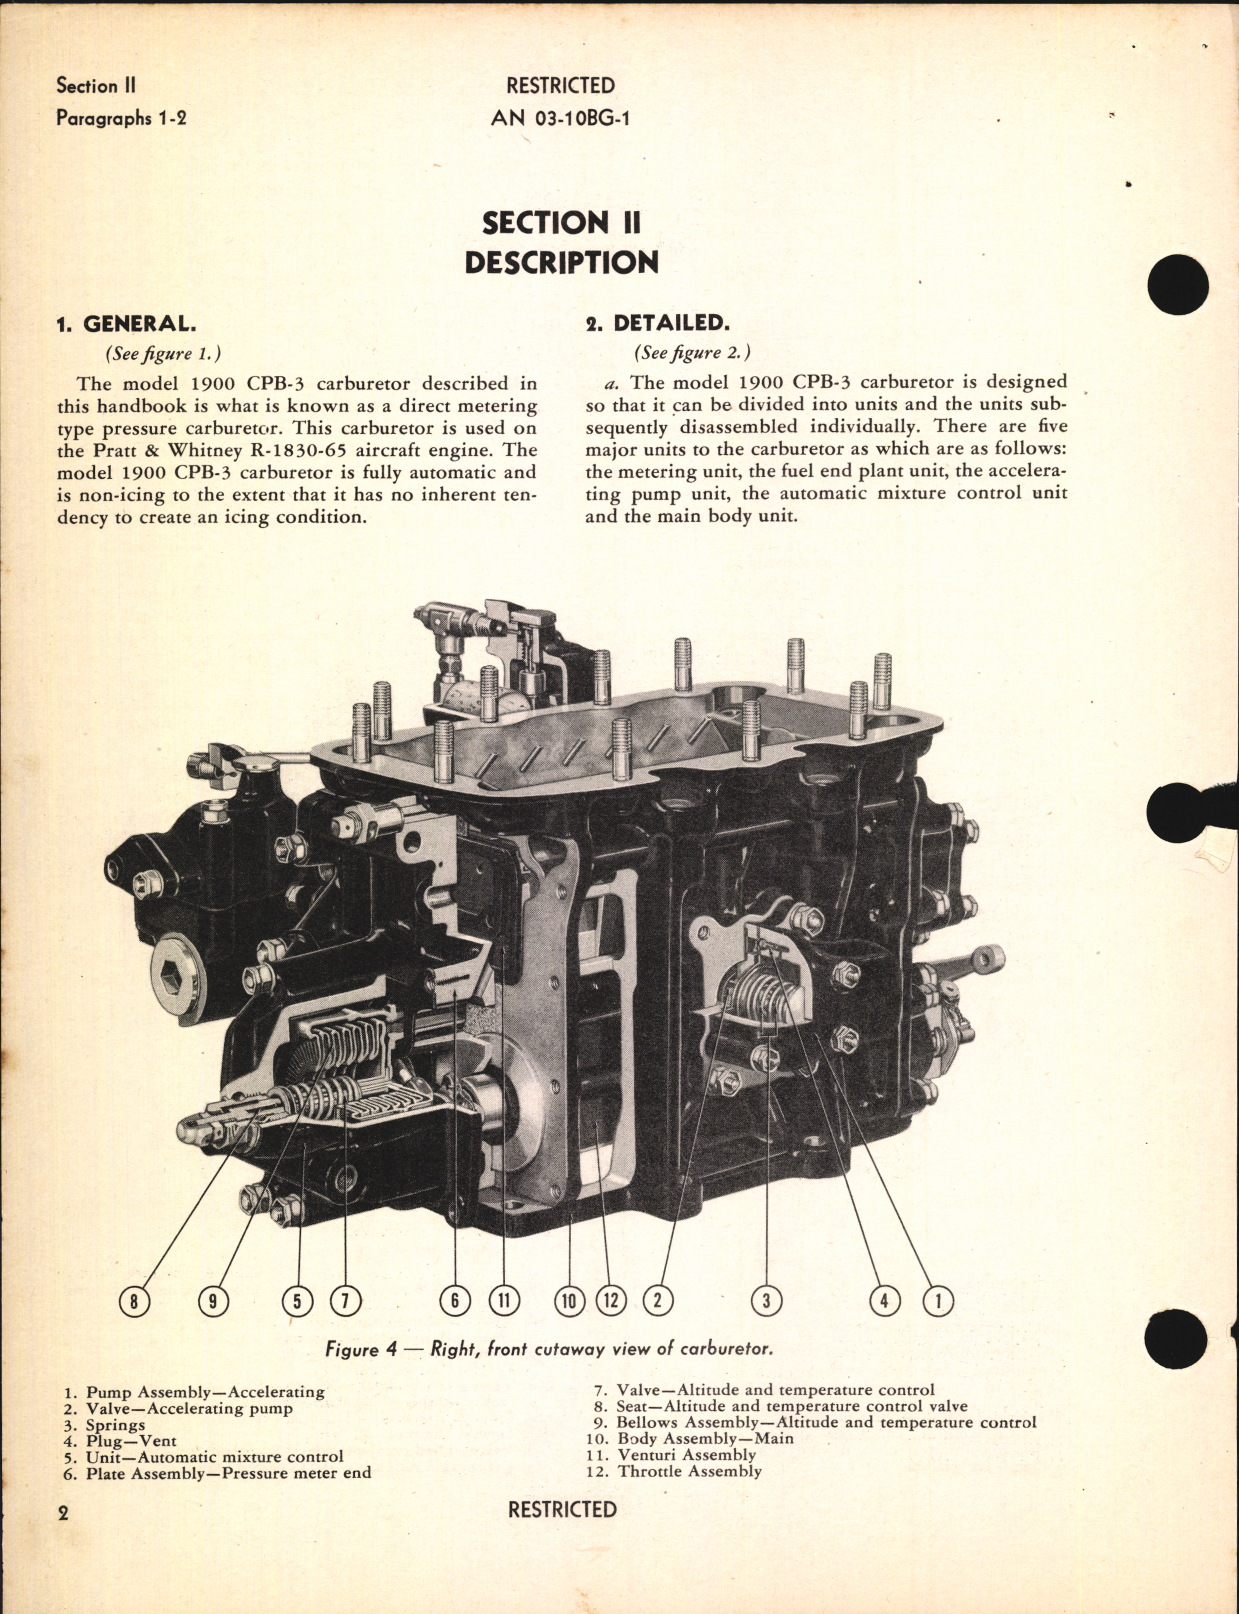 Sample page 8 from AirCorps Library document: Handbook of Instructions with Parts Catalog for Injection Carburetor Model 1900CPB-3